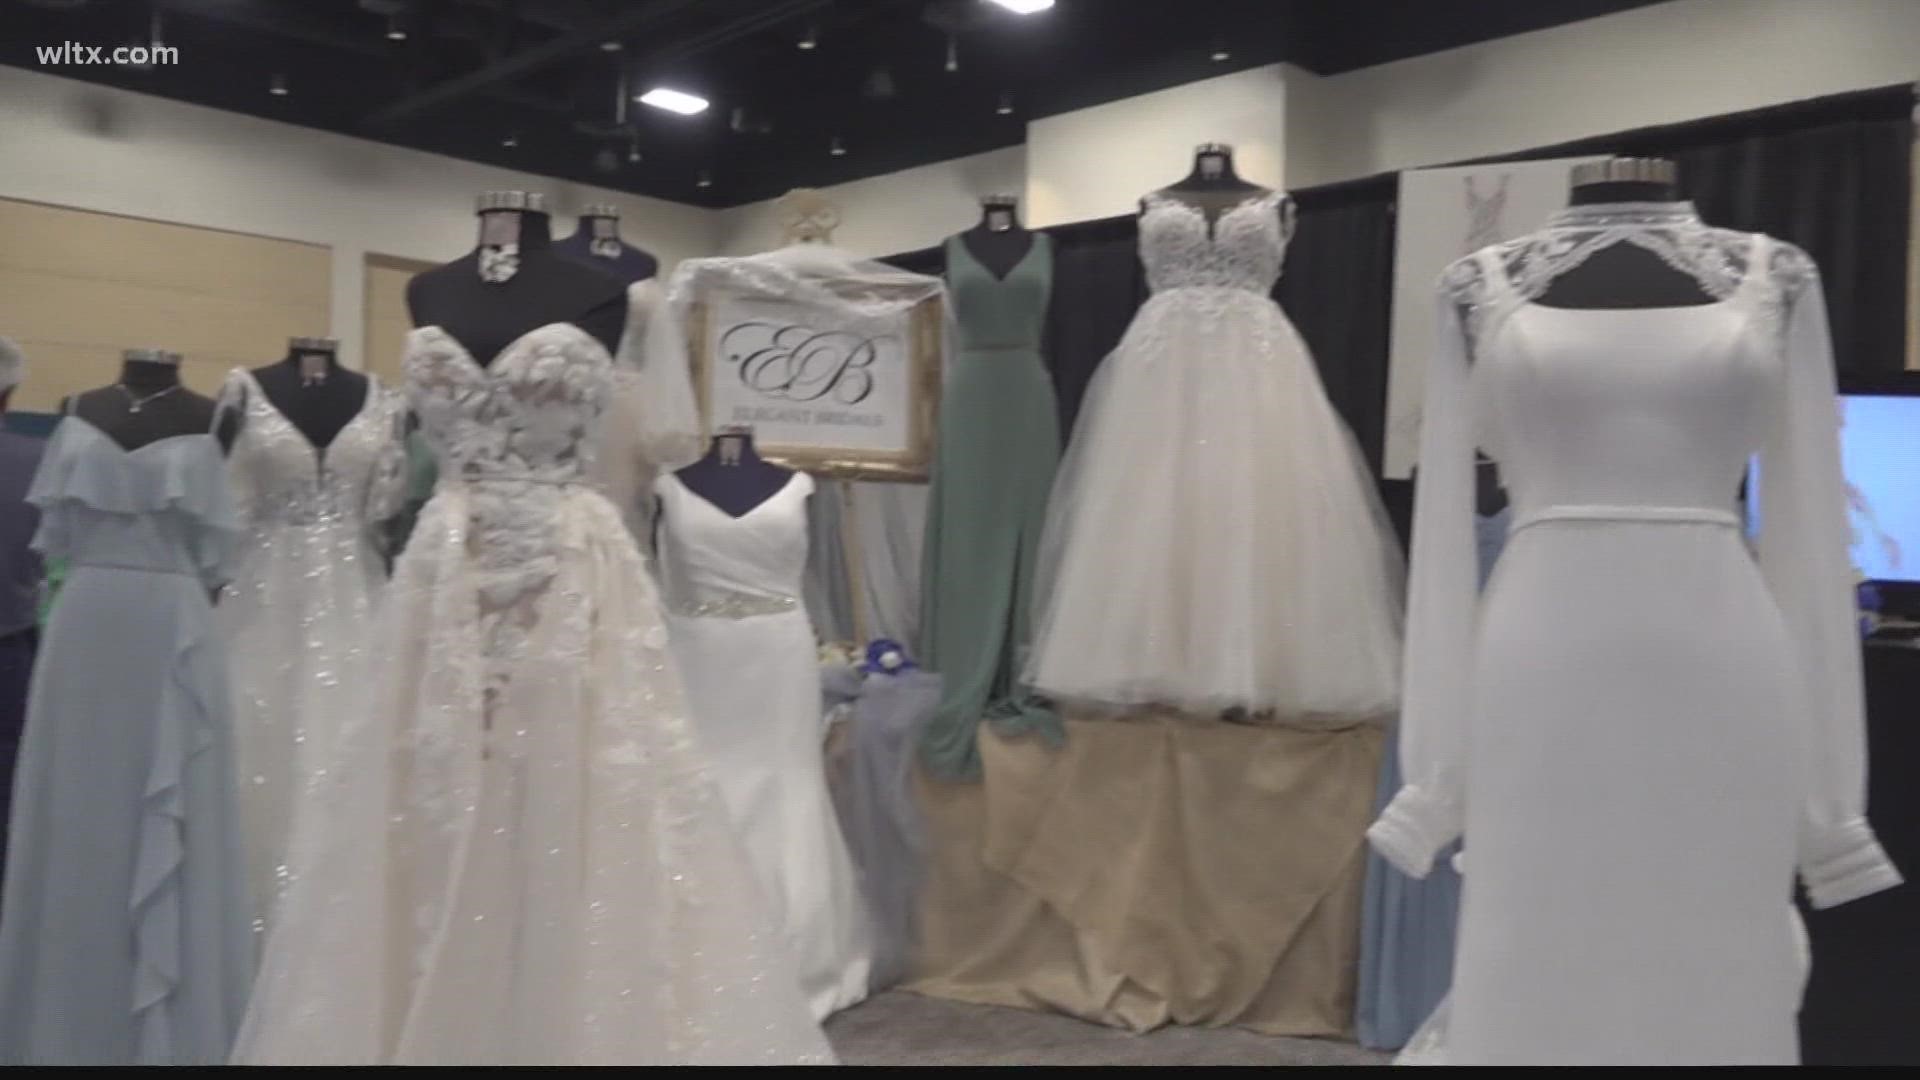 After a pandemic pause, a surge in new couples planning weddings means high demand and higher prices amid record inflation. https://www.wltx.com/article/money/higher